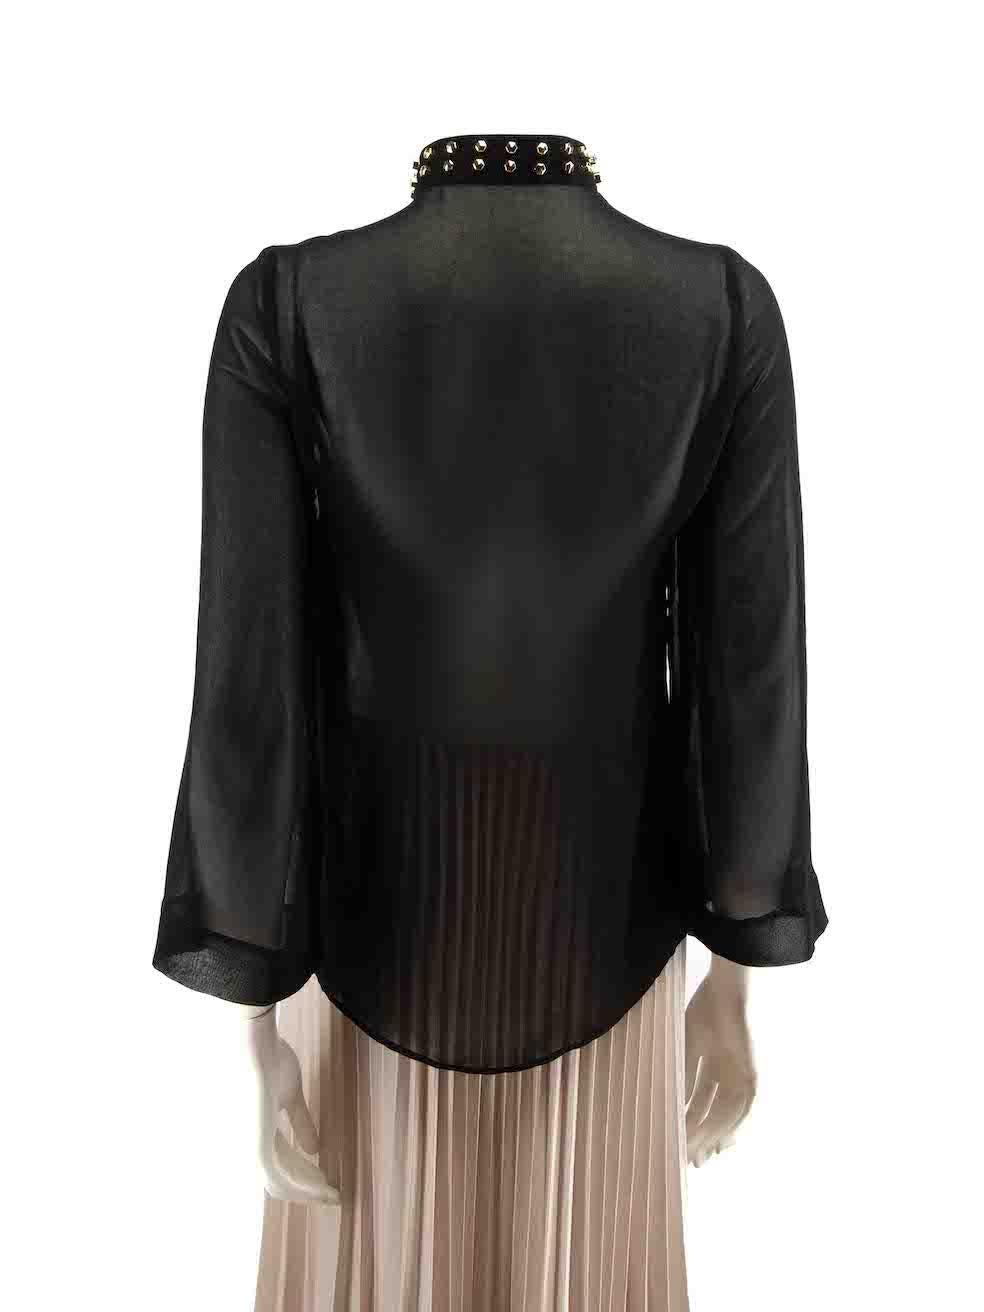 Versace Versace Collection Black Silk Sheer Studded Blouse Size S In Good Condition For Sale In London, GB